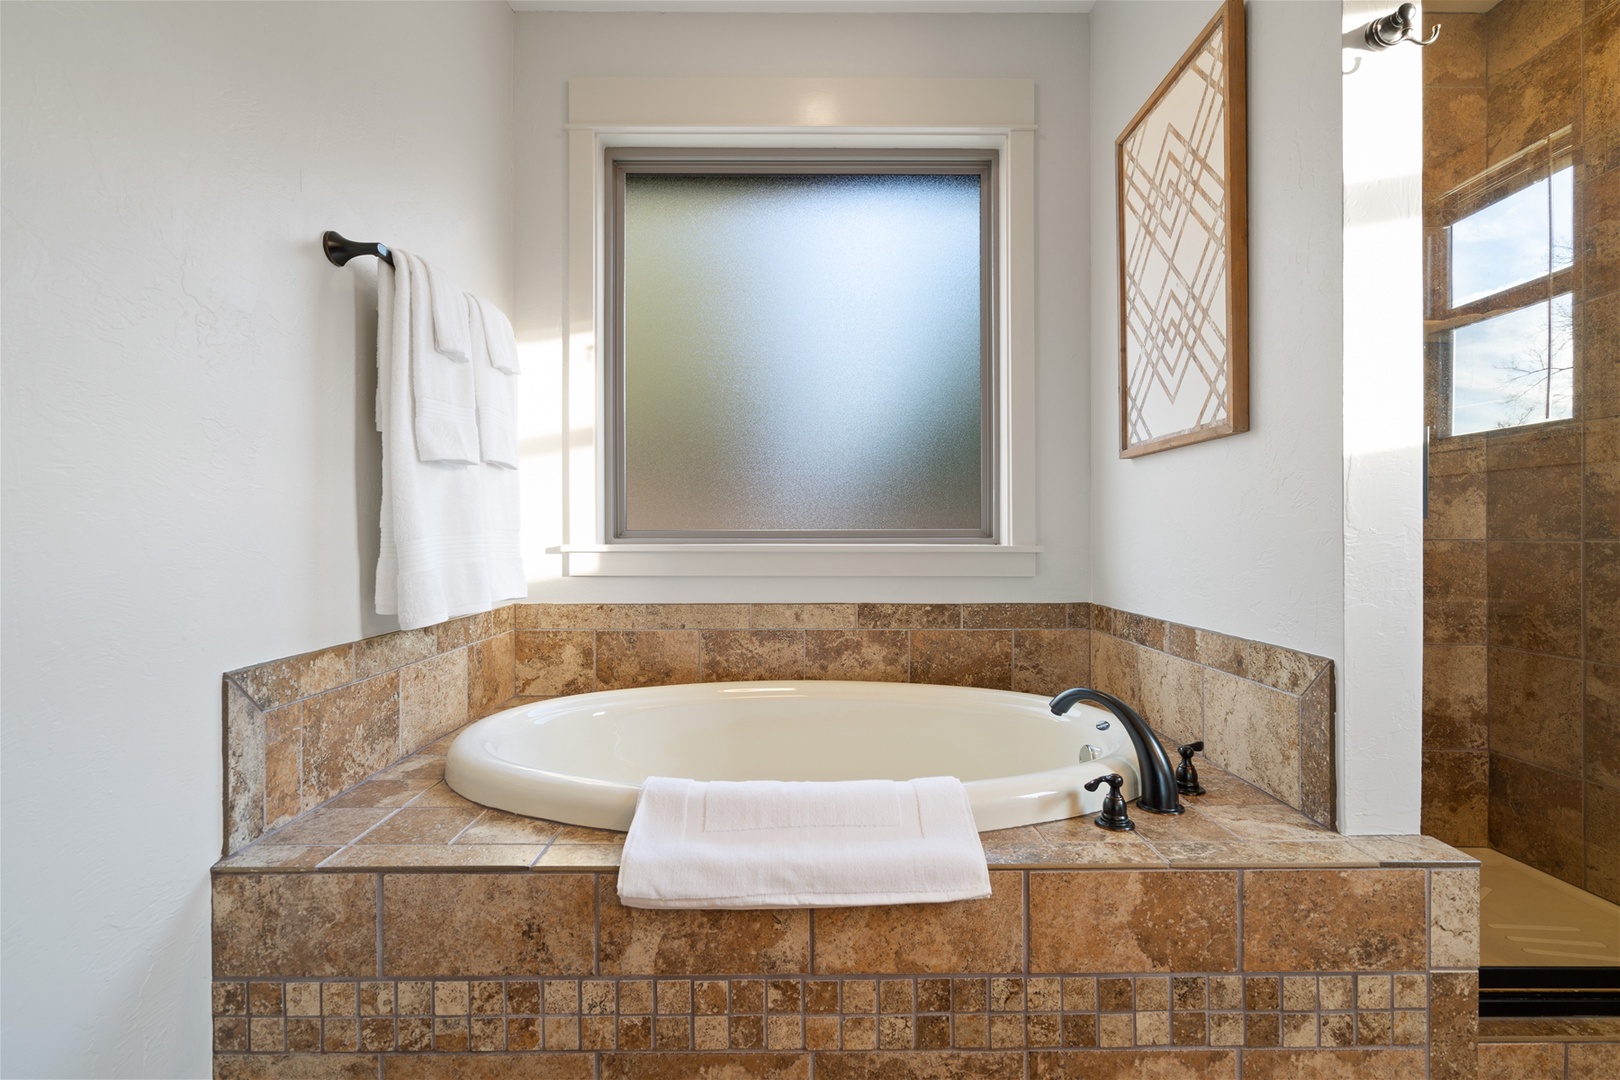 The Orchard - Entry Level King Suite Soaking Tub